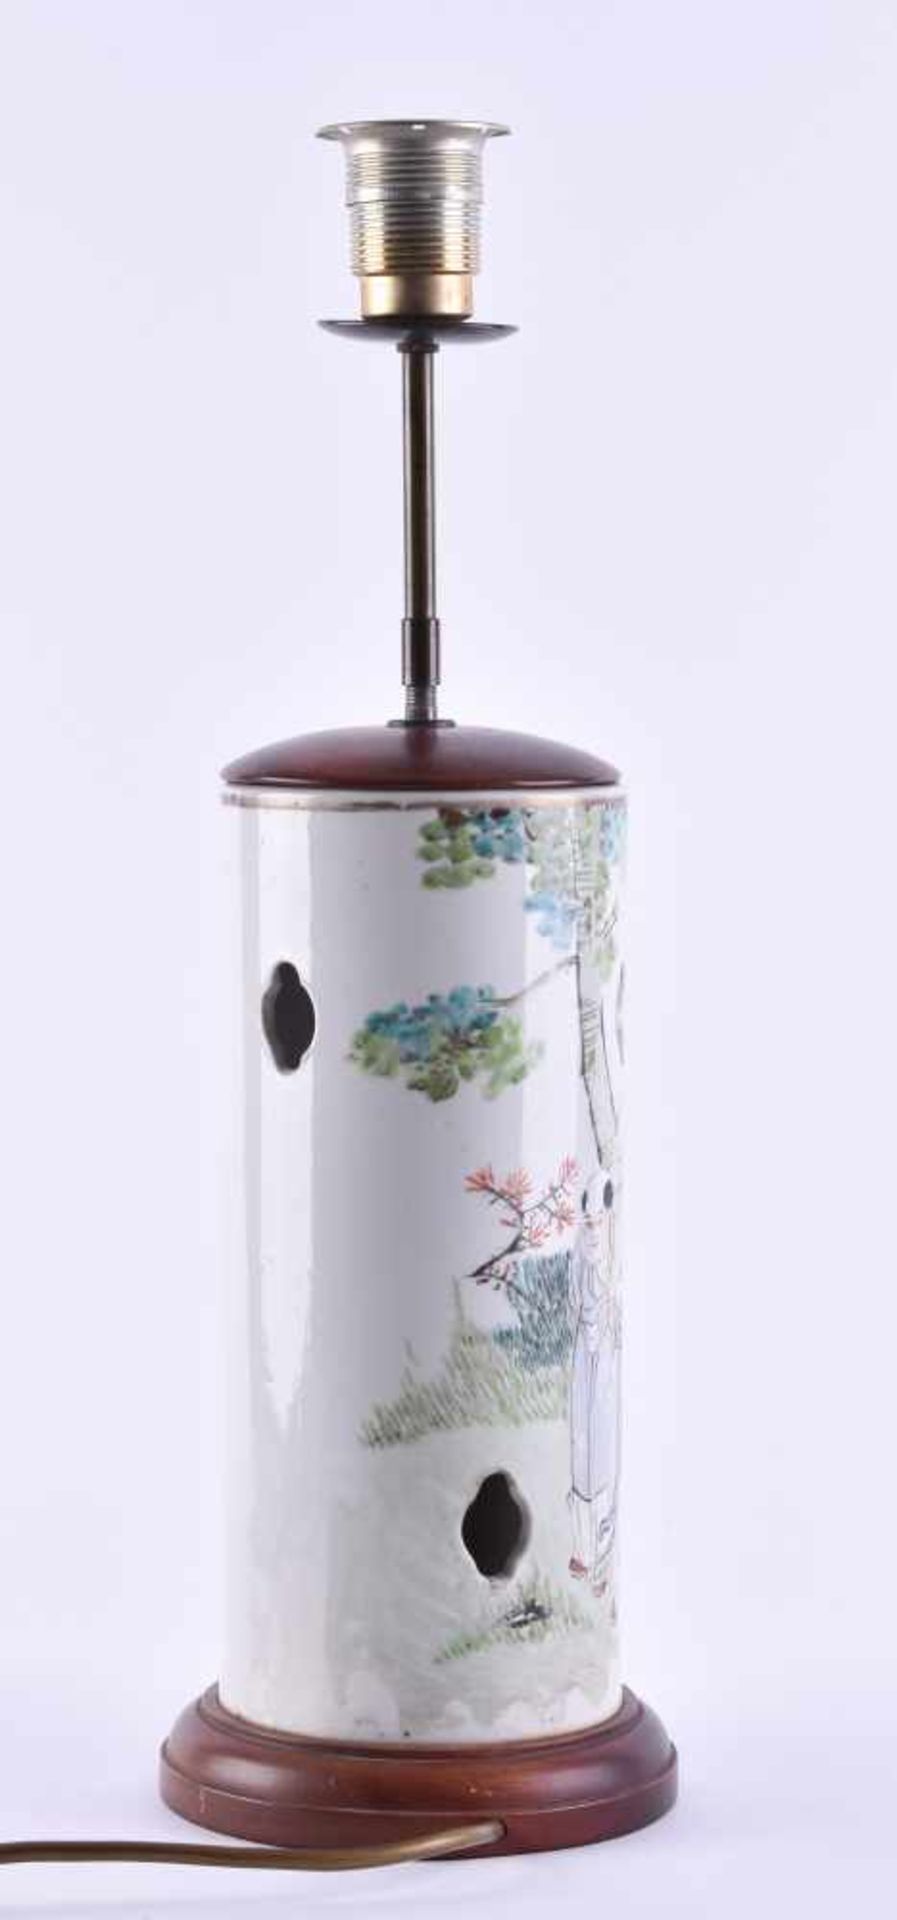 Lamp China Qing periodUmbrella holder rebuilt as a lamp, colorfully painted, total height 50 cm, - Image 2 of 5